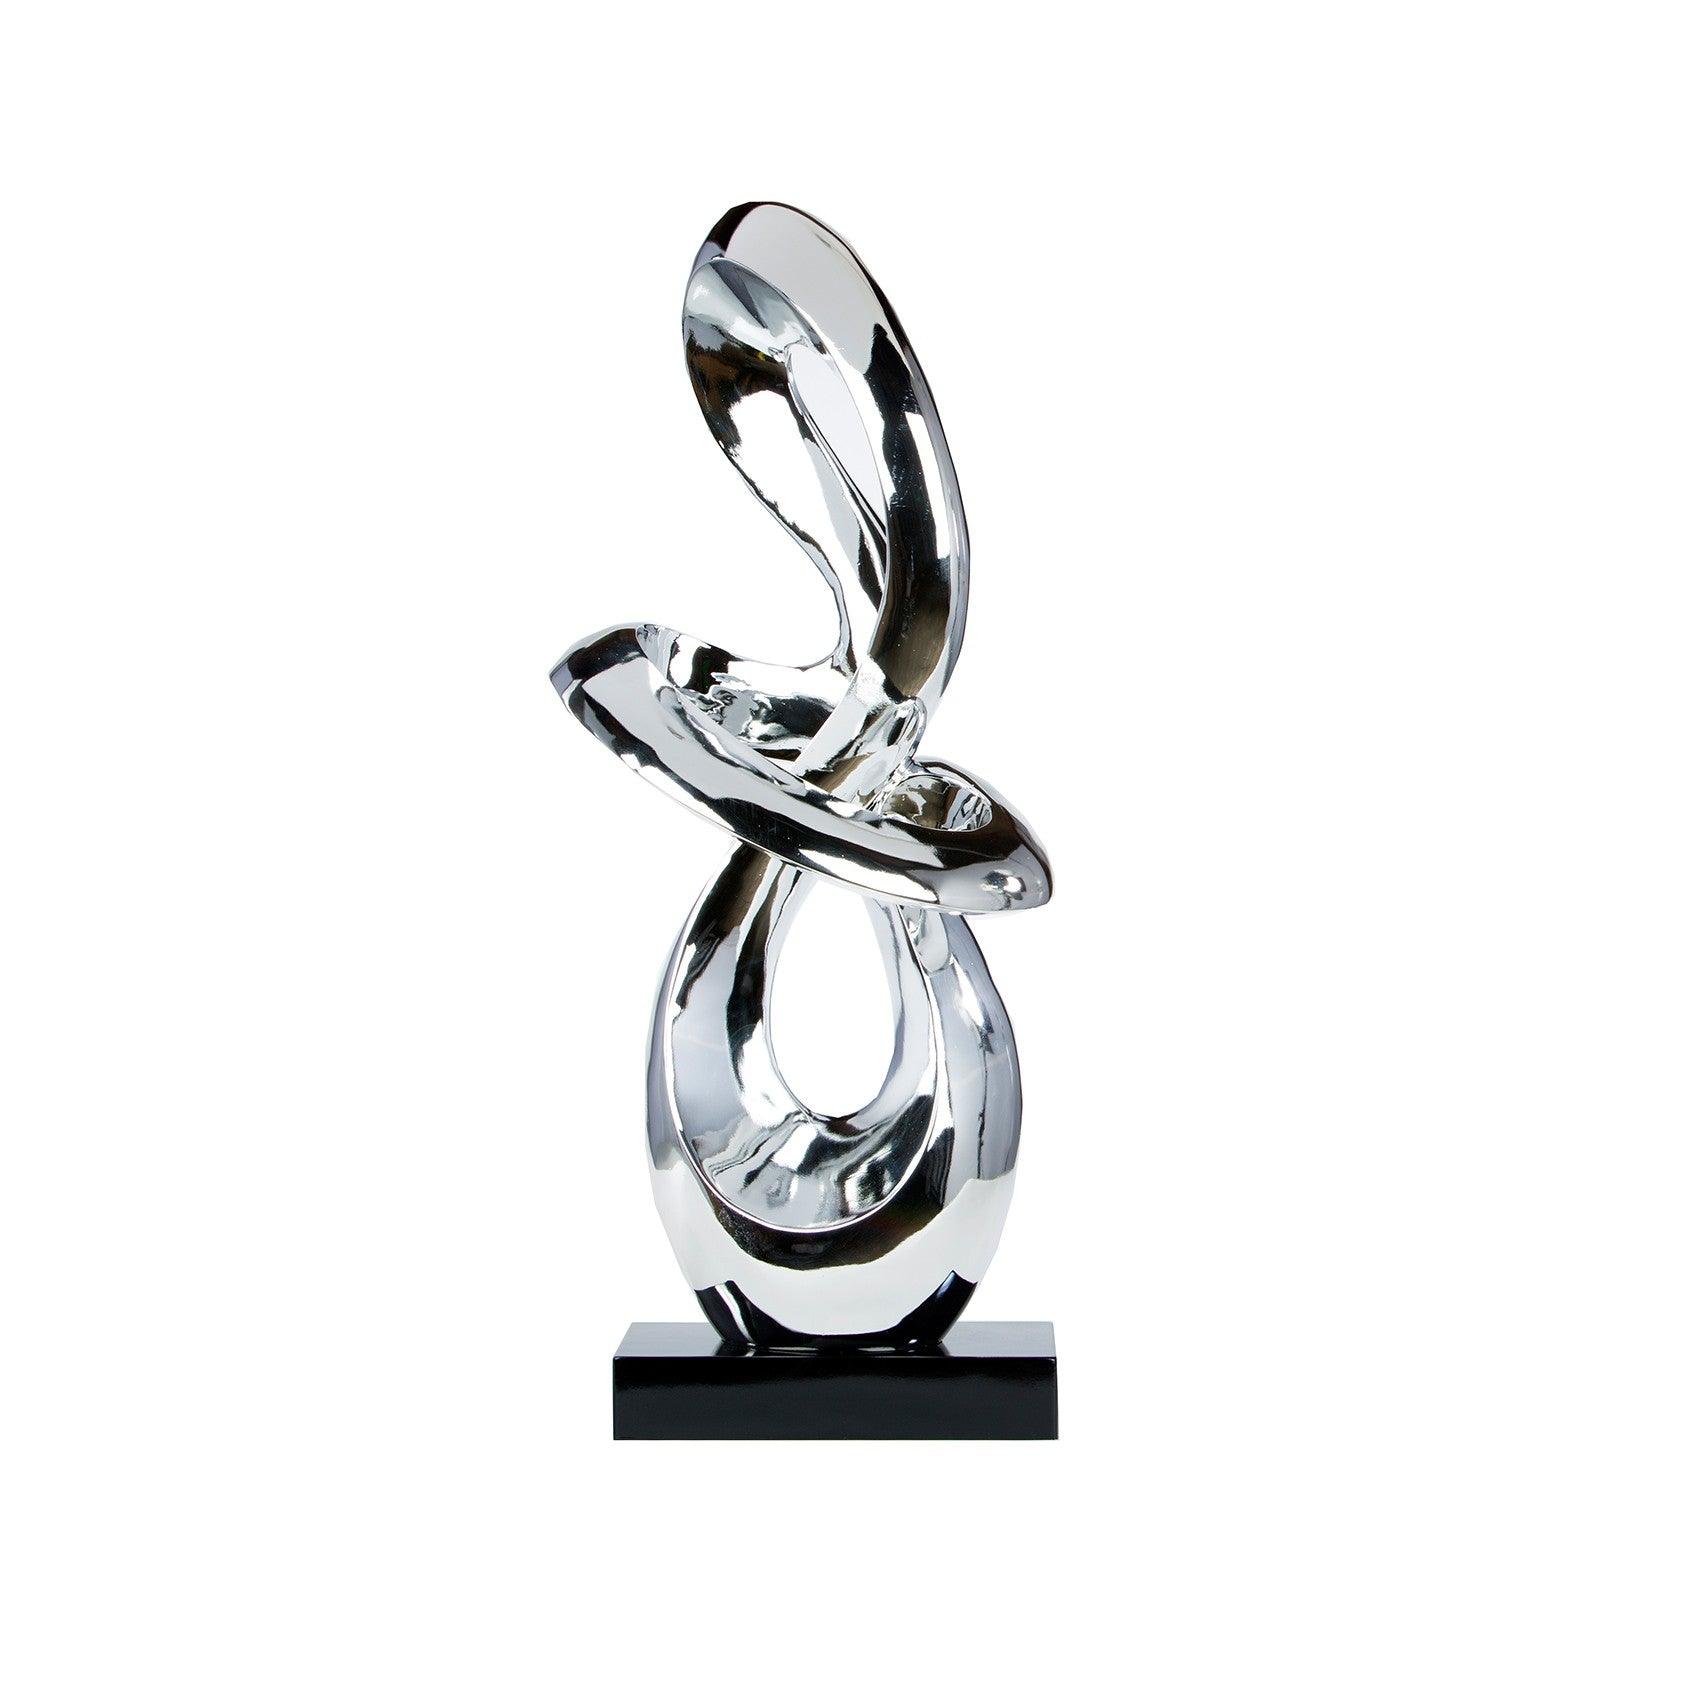 SCULPTURE ABSTRACT CHROME - Euro Living Furniture